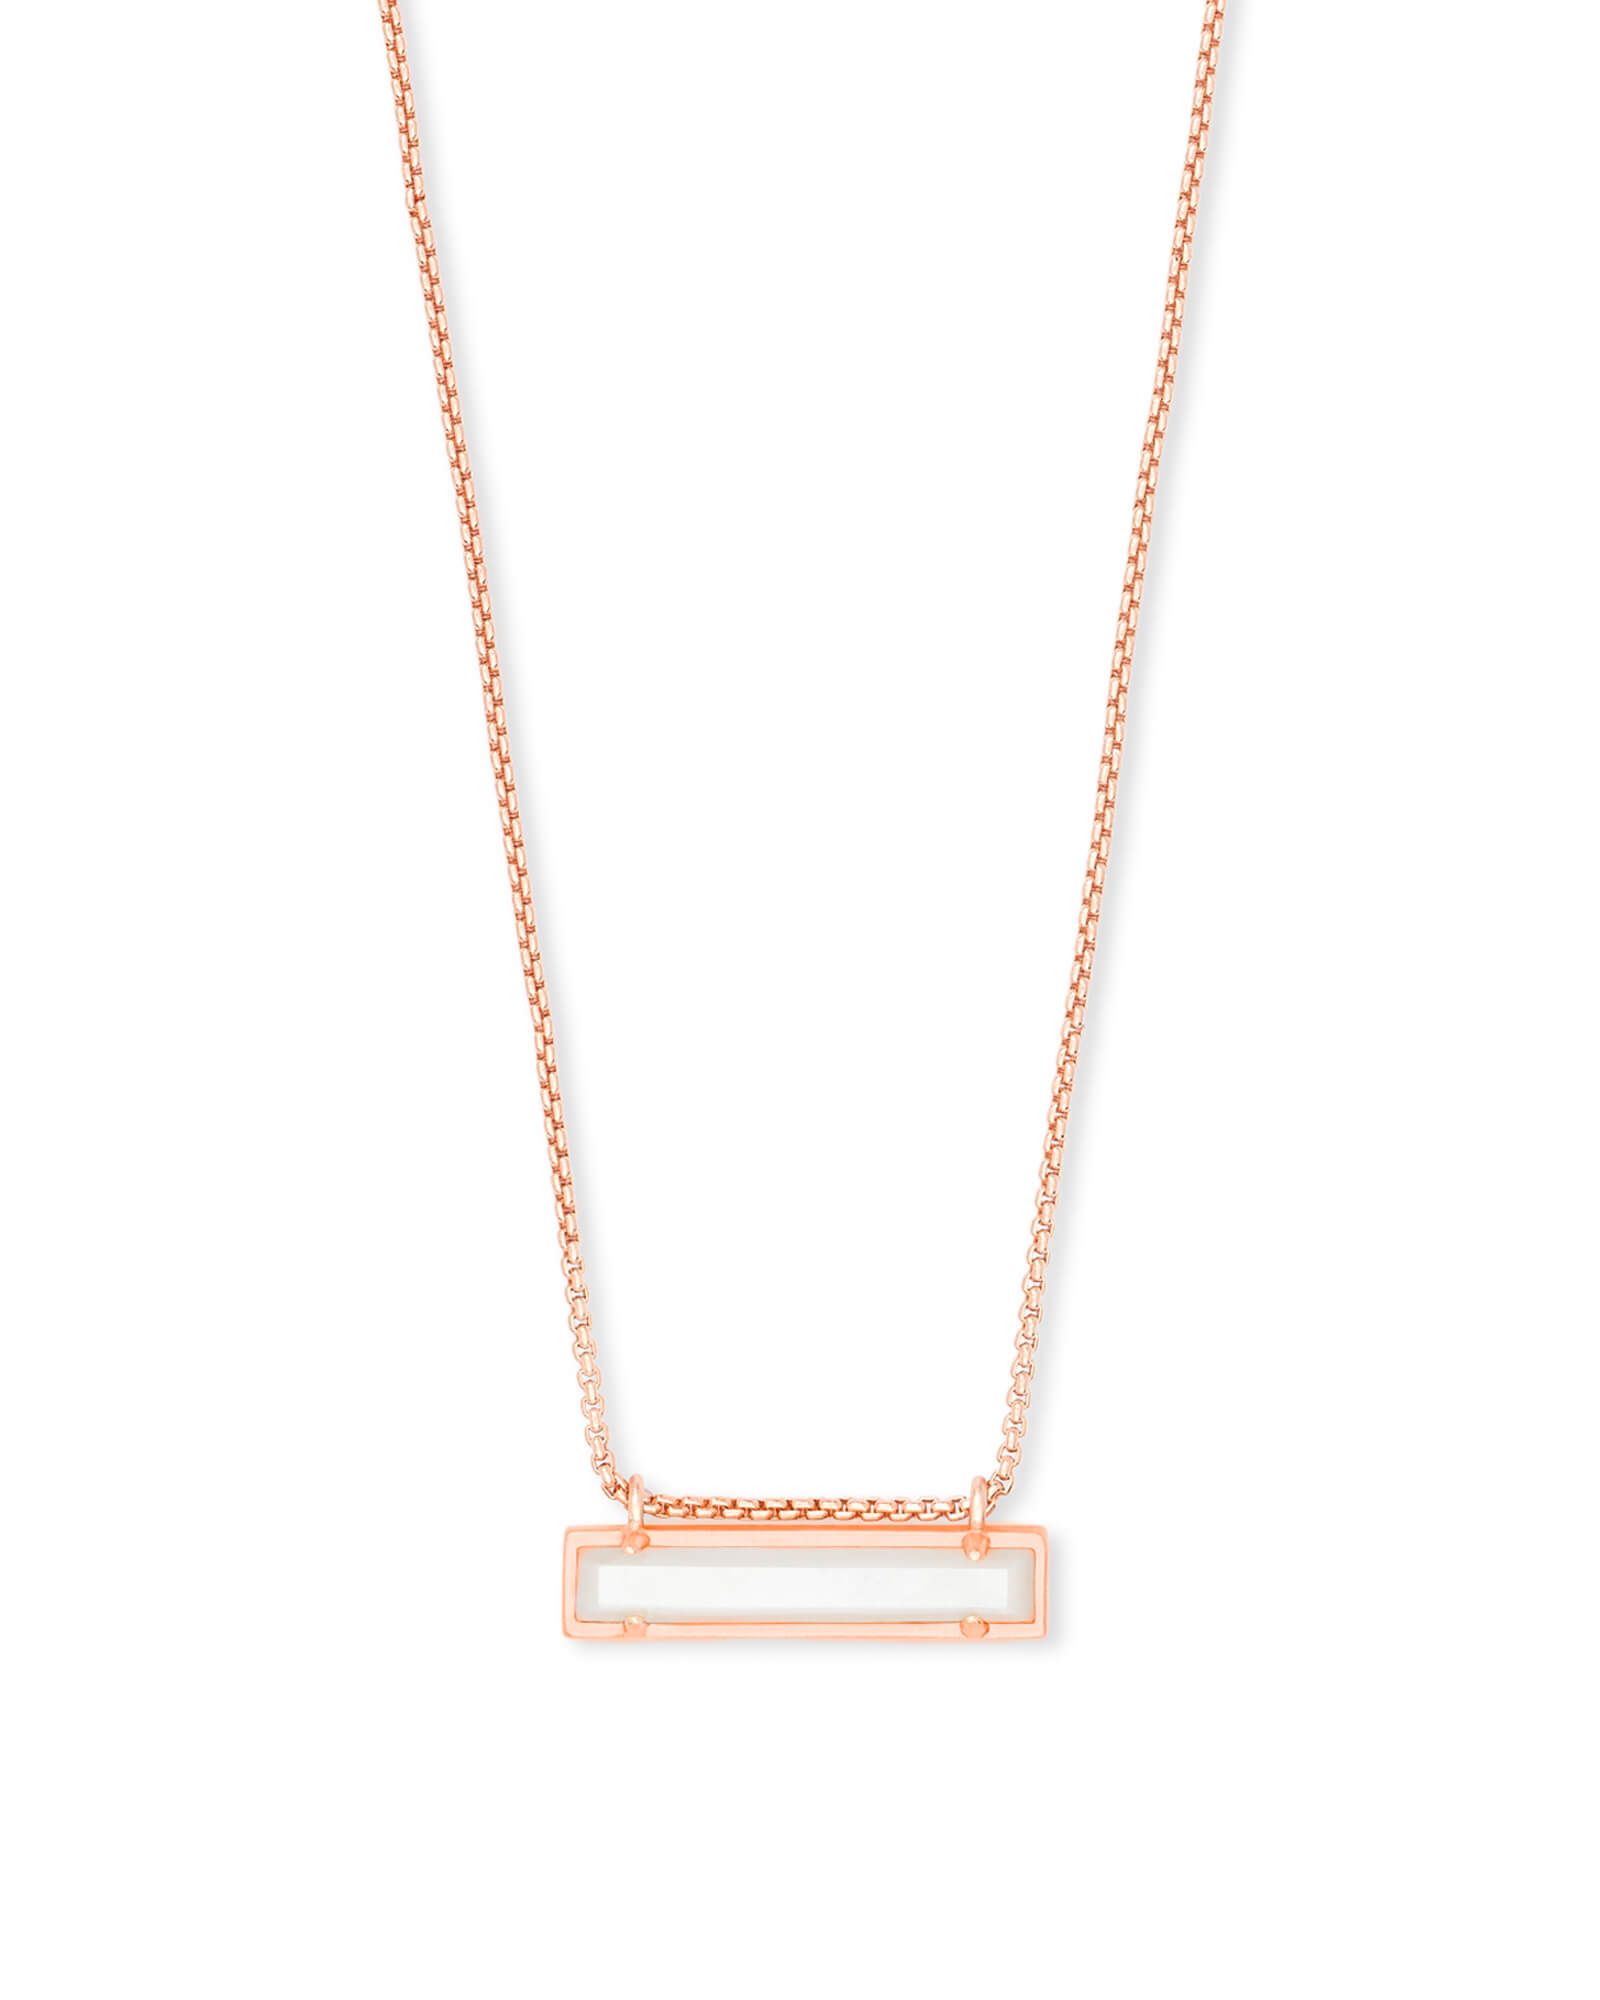 Leanor Rose Gold Pendant Necklace in Ivory Pearl | Kendra Scott